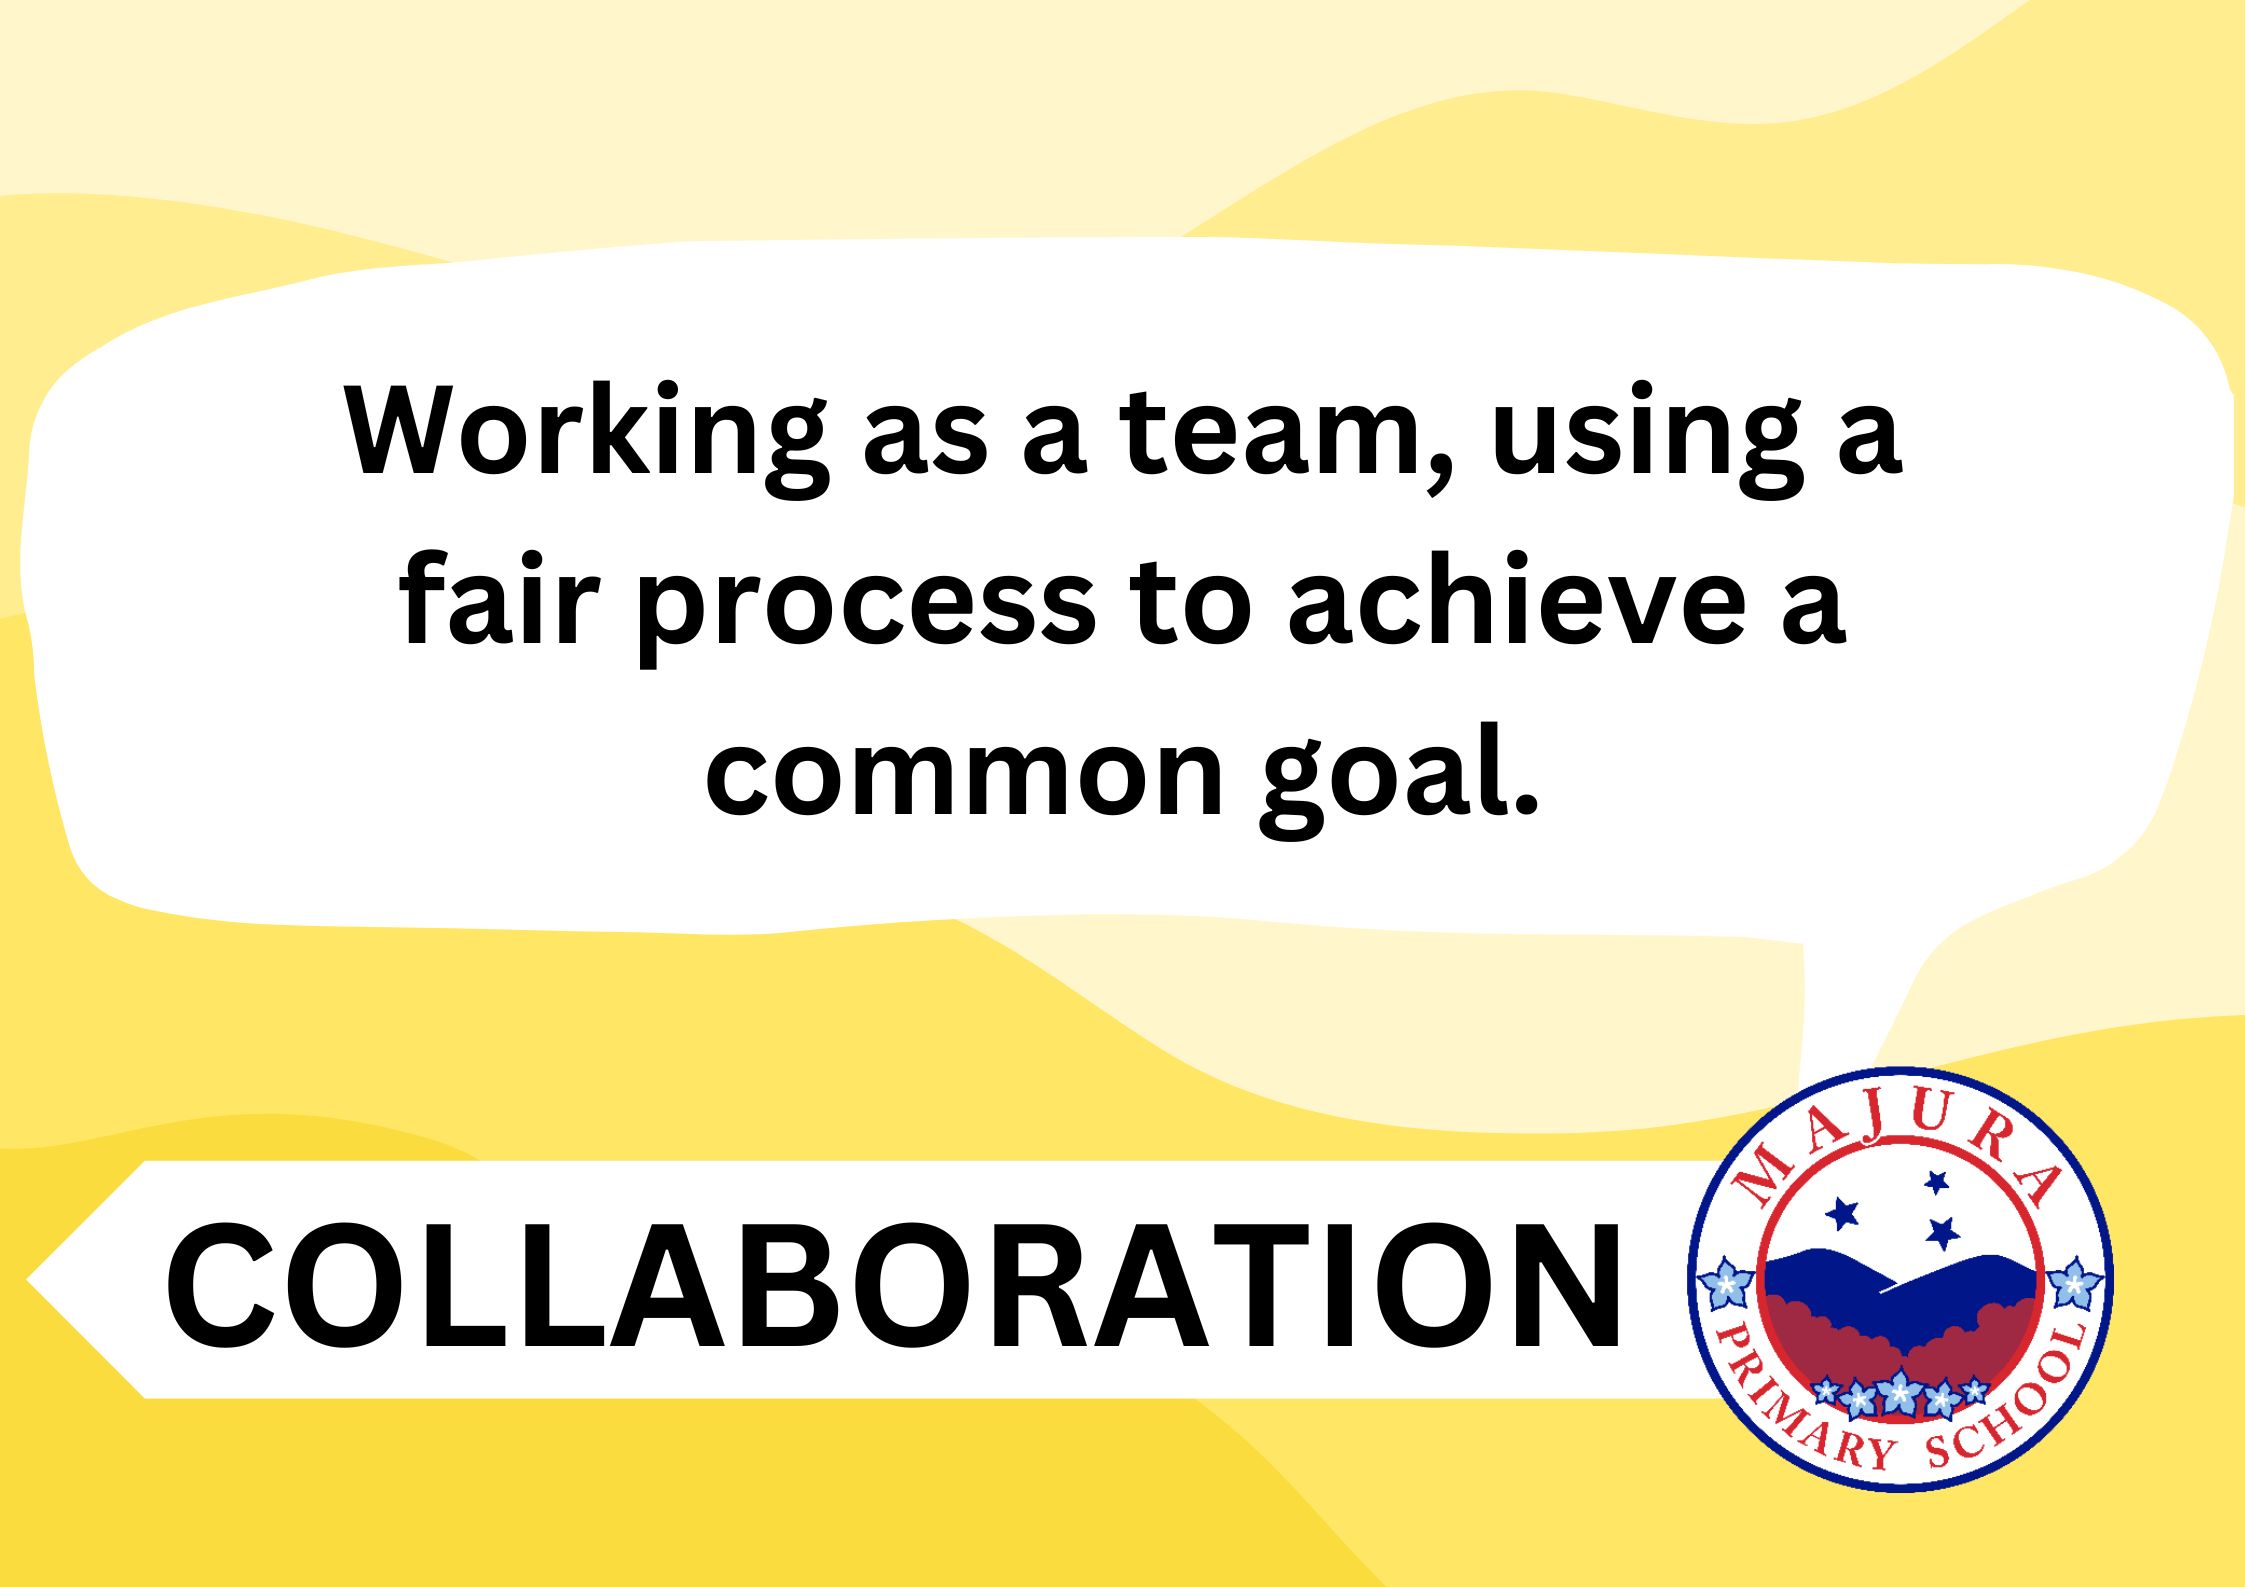 Next to the Majura Primary logo is the word 'Collaboration'. Above this is a speech bubble that reads 'Working as a team, using a fair process to achieve a common goal'.